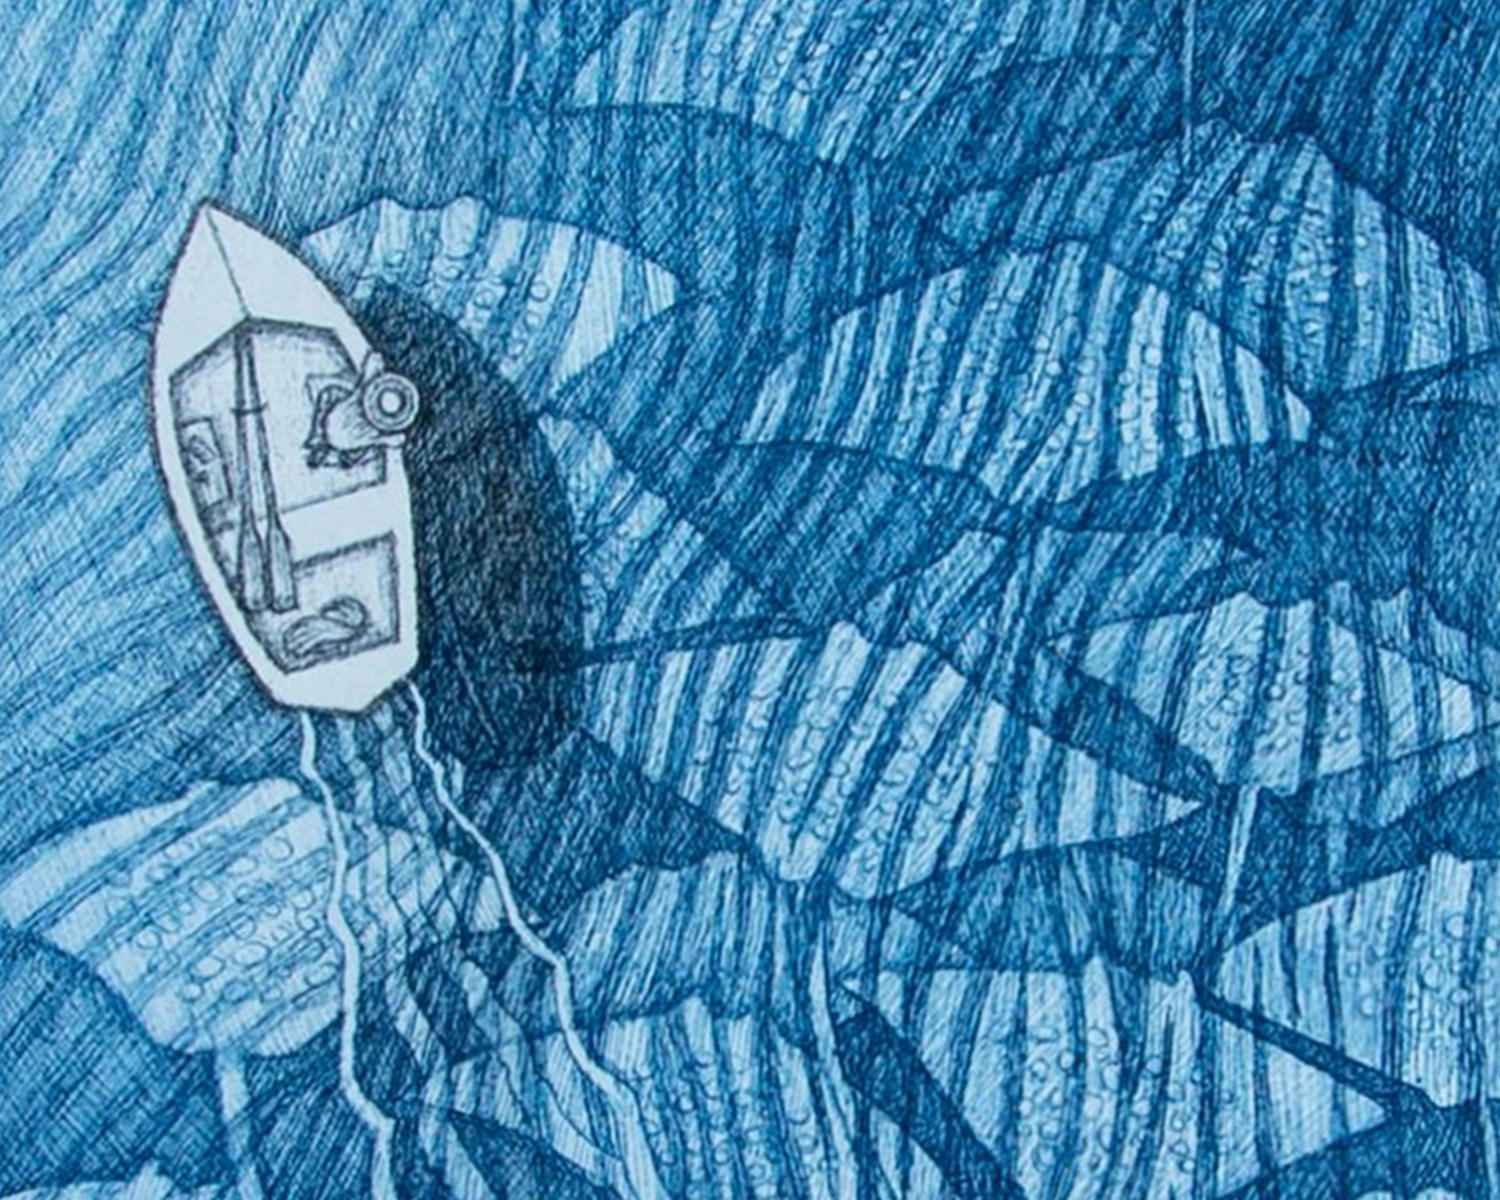 An illustrative looking blue etching depicting an arial perspective of a boat on the water with a pod of over large manta rays moving below it.